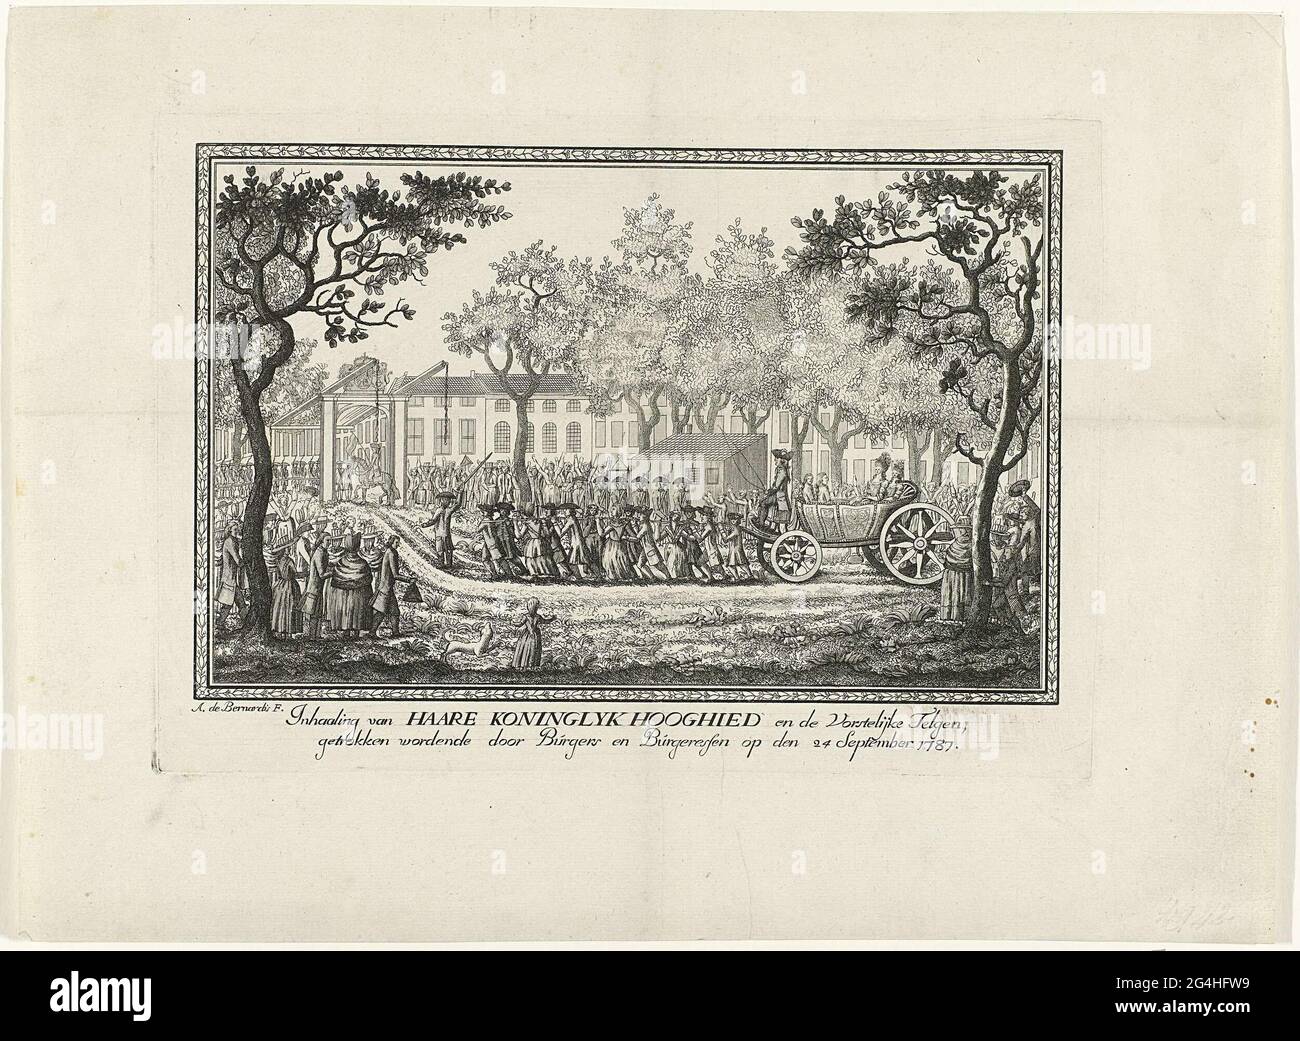 . Raying of the Princess of Orange and the children by the Burgerij in The Hague, 24 September 1787. The open carriage with the royal family is pulled by men and women over the road to the Bosch Bridge. With decorated frame. Stock Photo